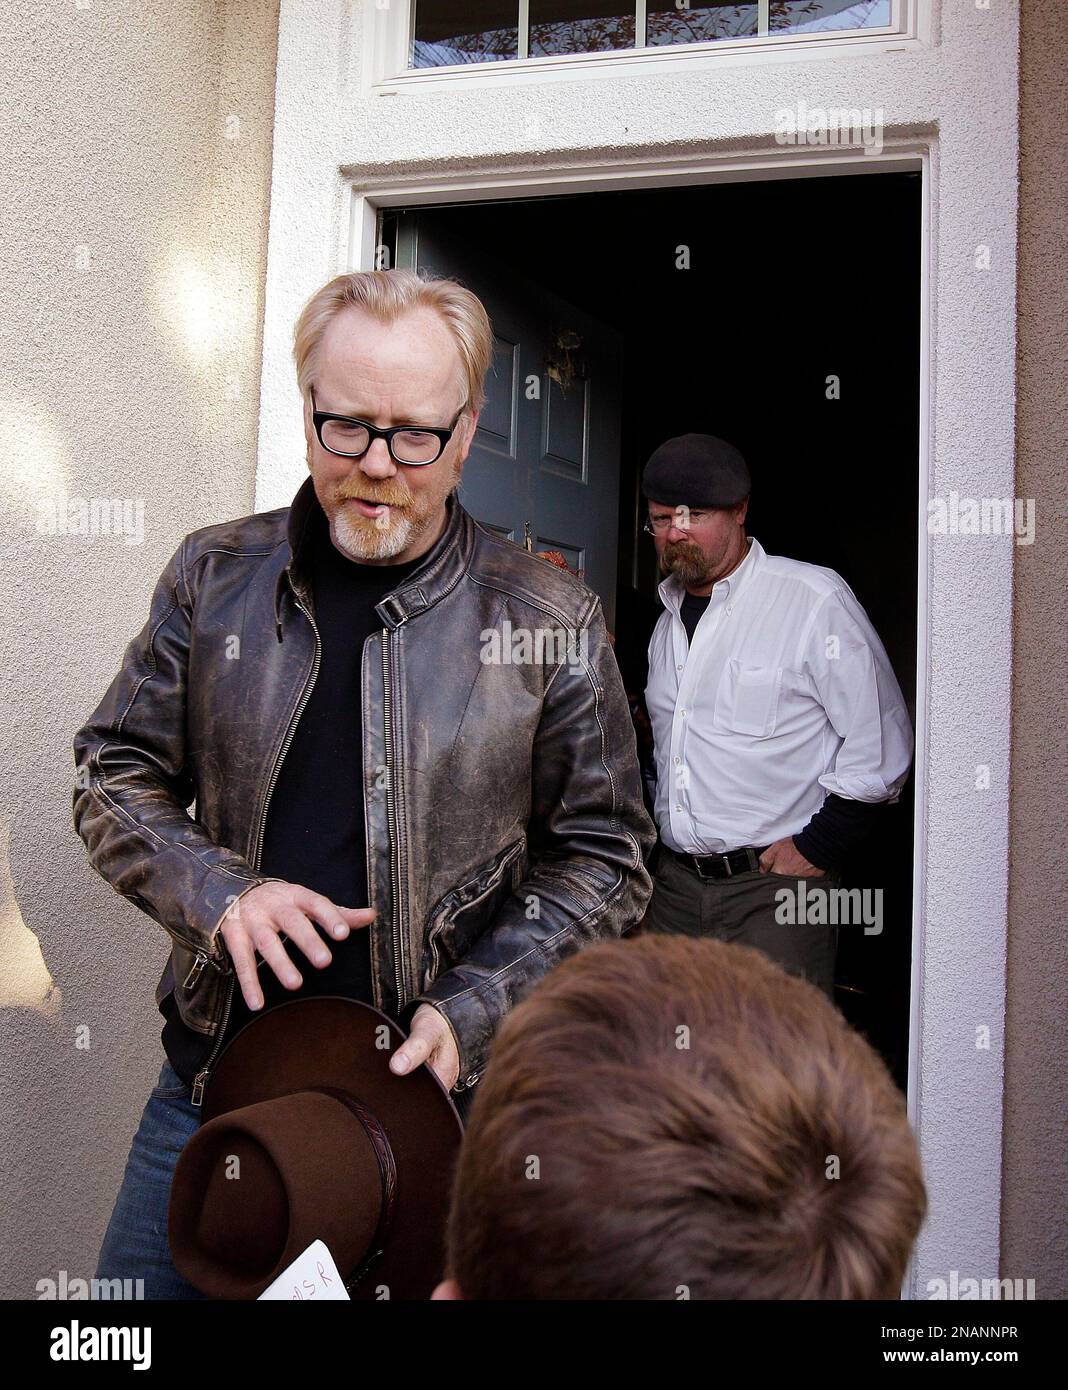 Mythbusters" stars Adam Savage, left, and Jamie Hyneman walk past a child  seeking autographs as they exit the home damaged by an errant cannonball  fired during a filming of an episode of